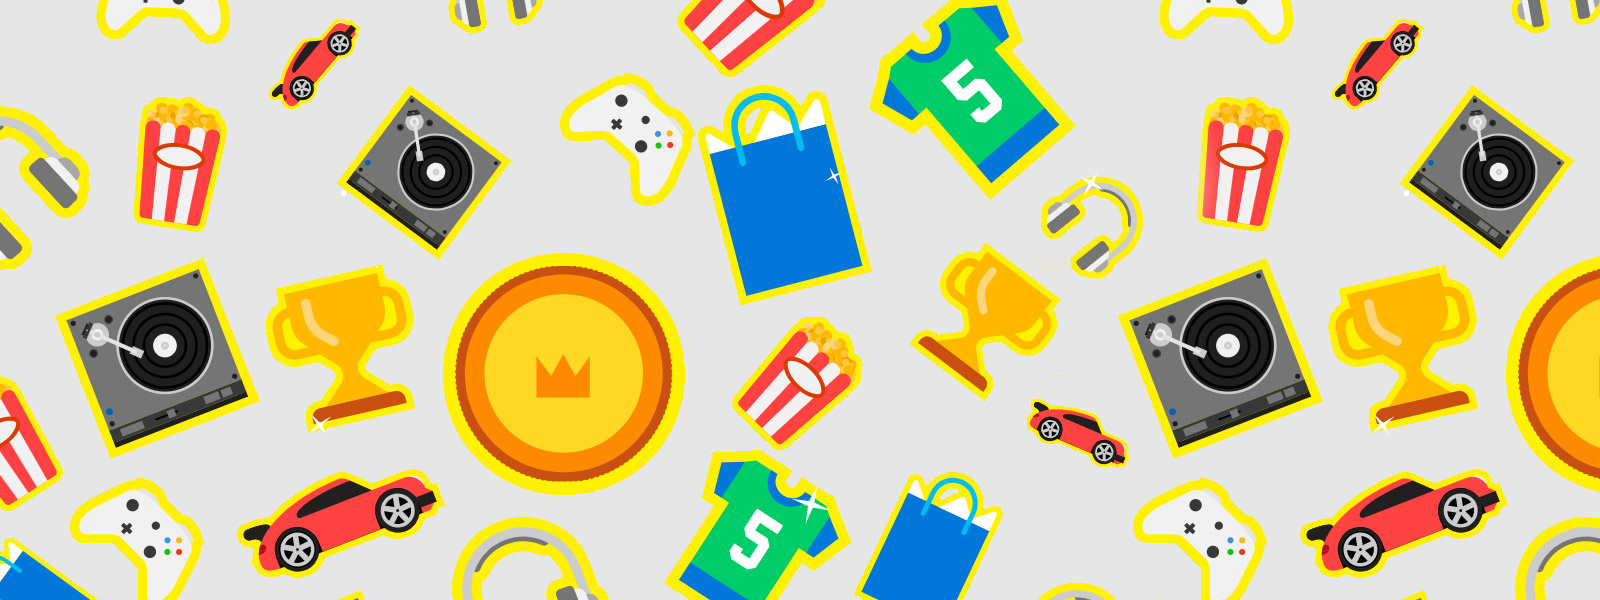 Various icons, including popcorn buckets, headphones, trophies, and cars. 